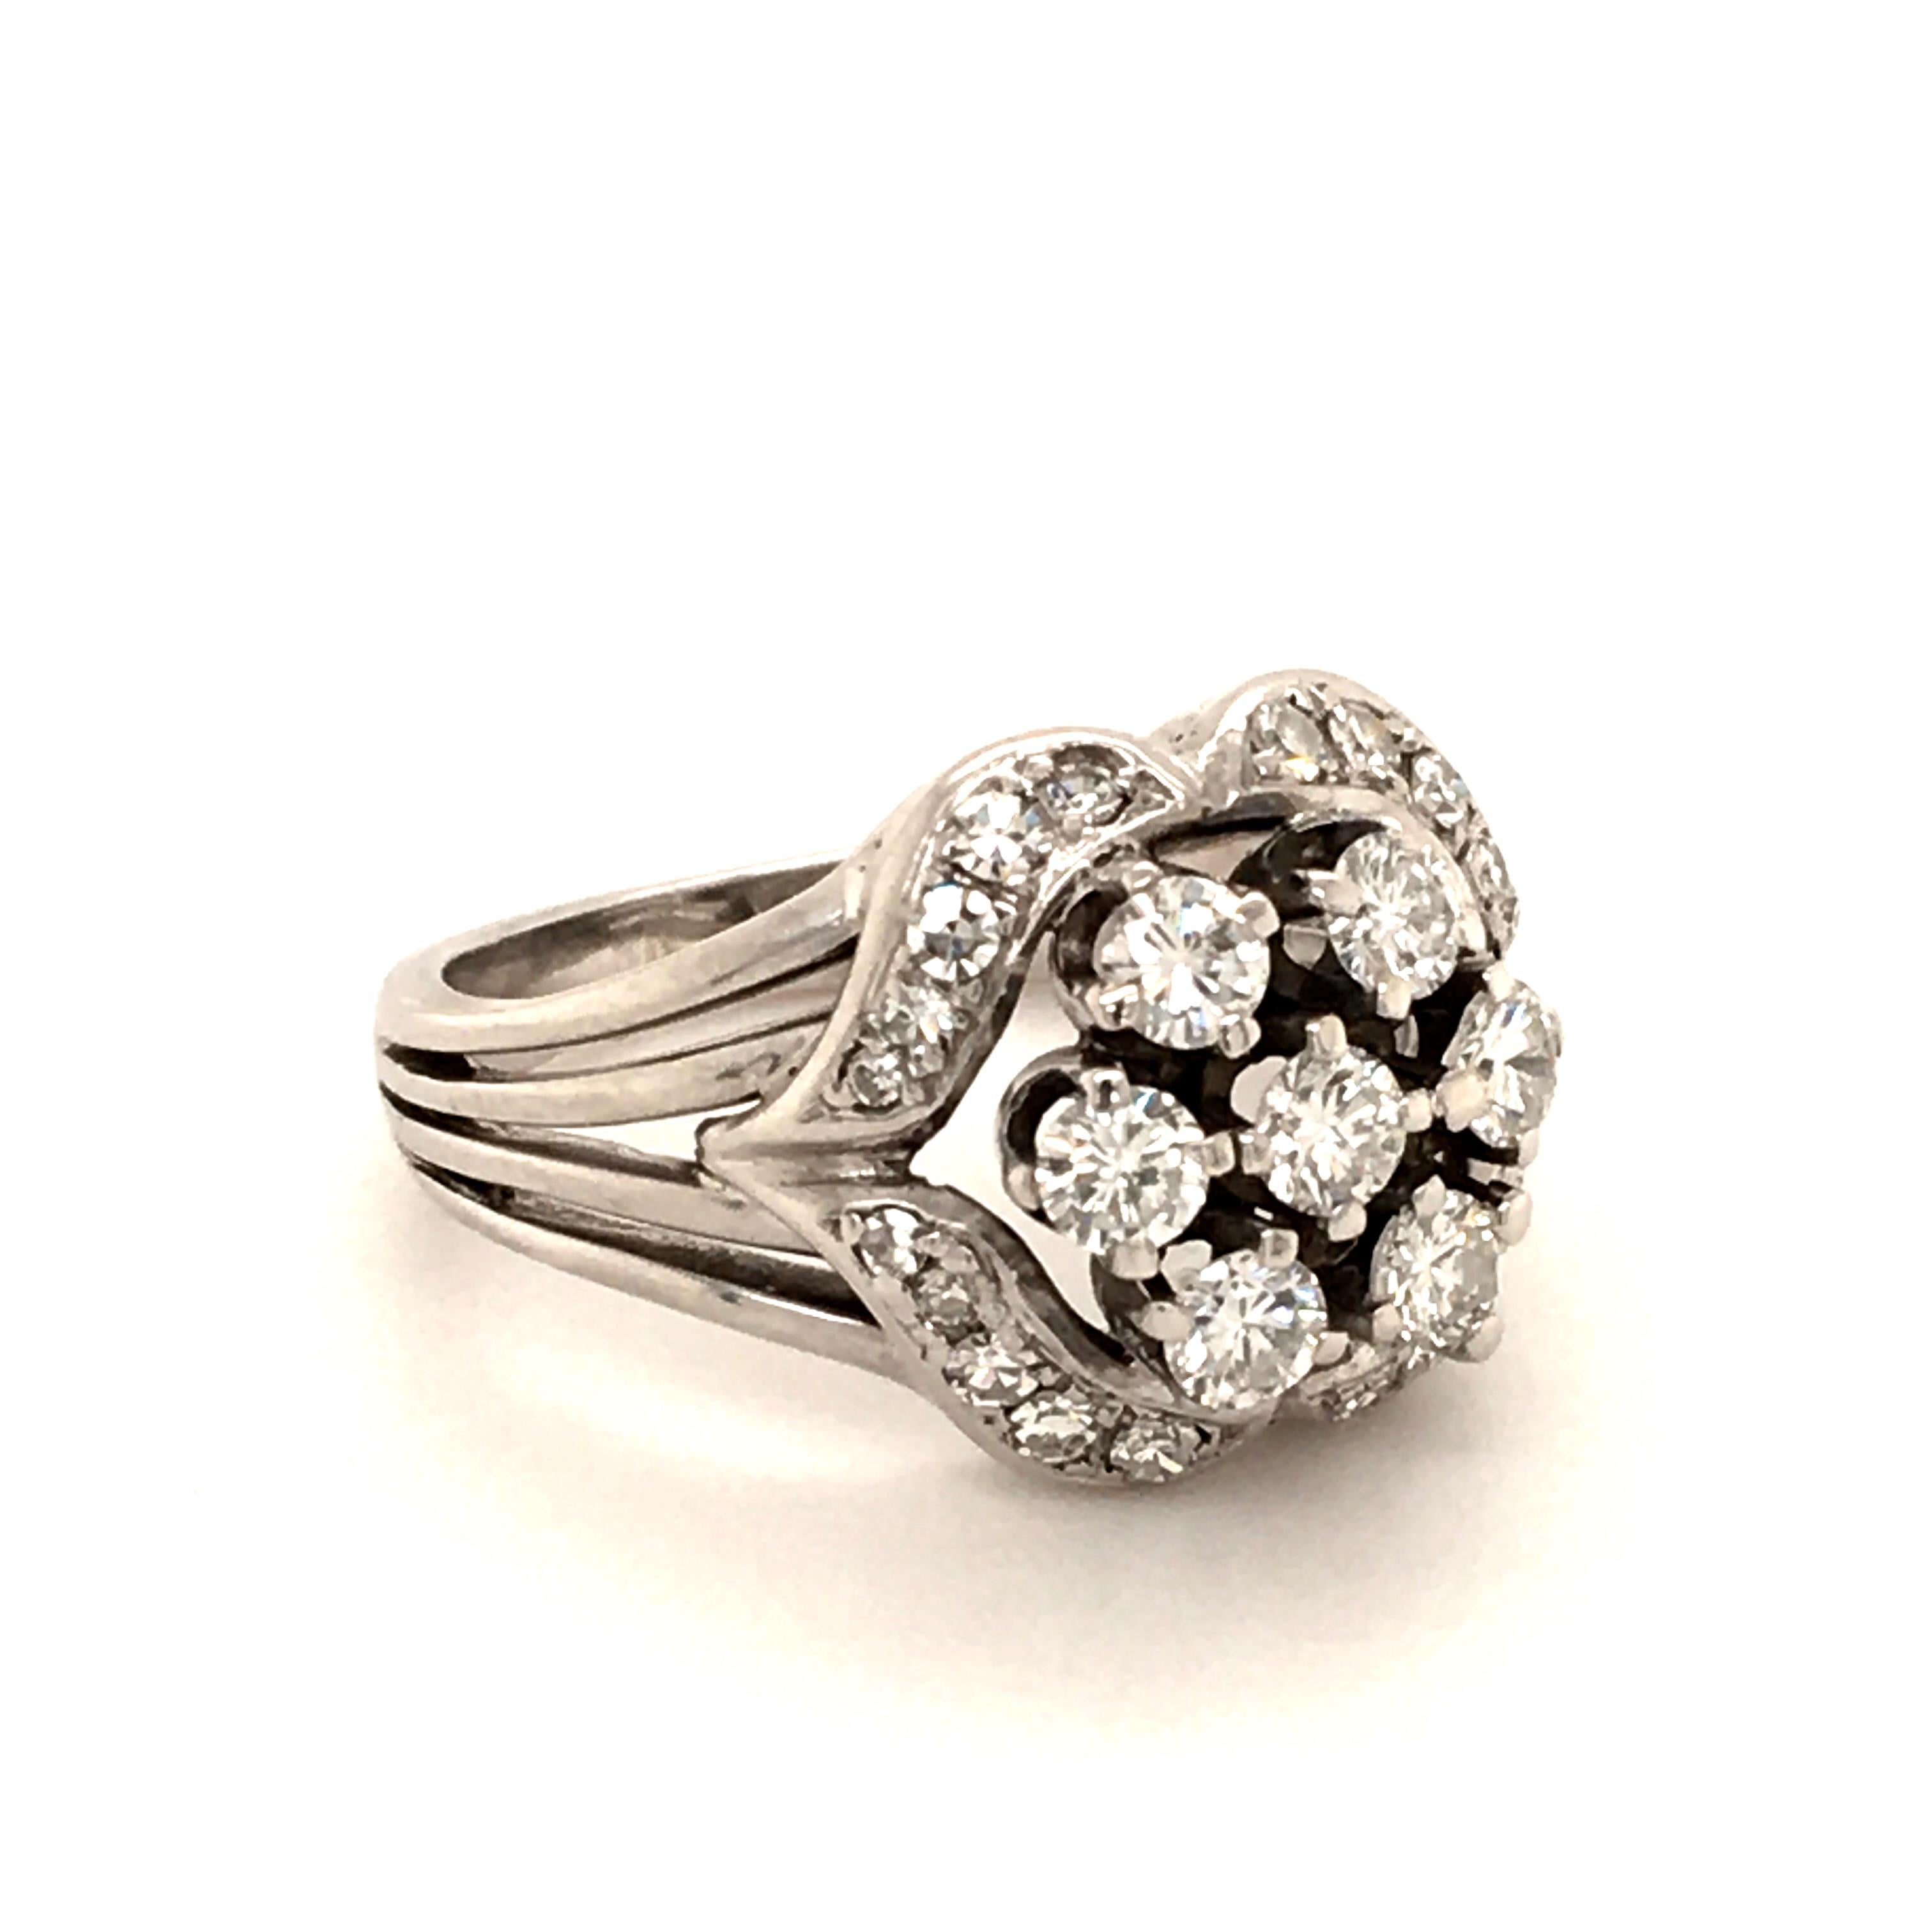 Playful ring in 18 Karat white gold. Designed as a cluster of seven brilliant-cut diamonds of G/H-vs quality totalling approximate 0.70 ct; embedded in 20 single-cut diamonds totalling 0.30 ct.
Classy look from the 1960ies.

Size: 54 EU / 6.5